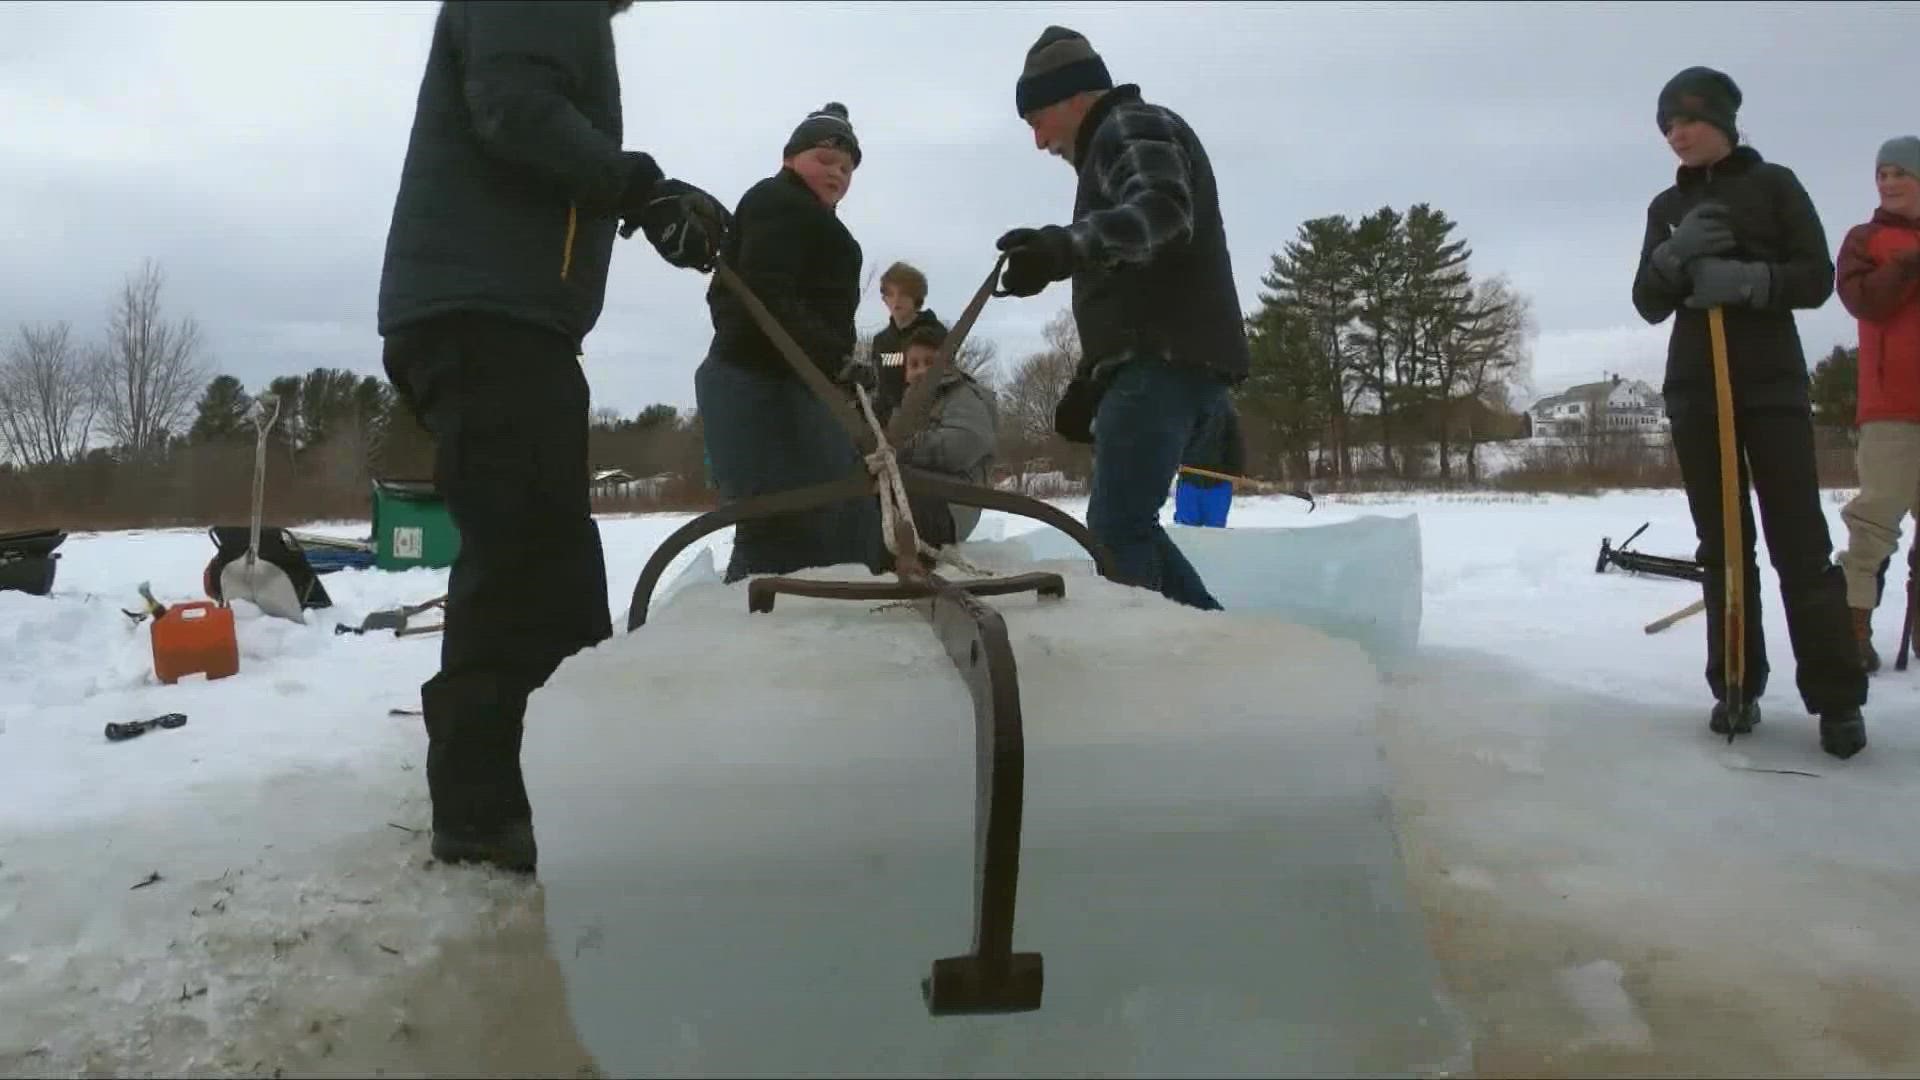 Ice harvesting isn't as big of an industry here in Maine as it was hundreds of years ago, but the tradition still exists, and some students learned the techniques.